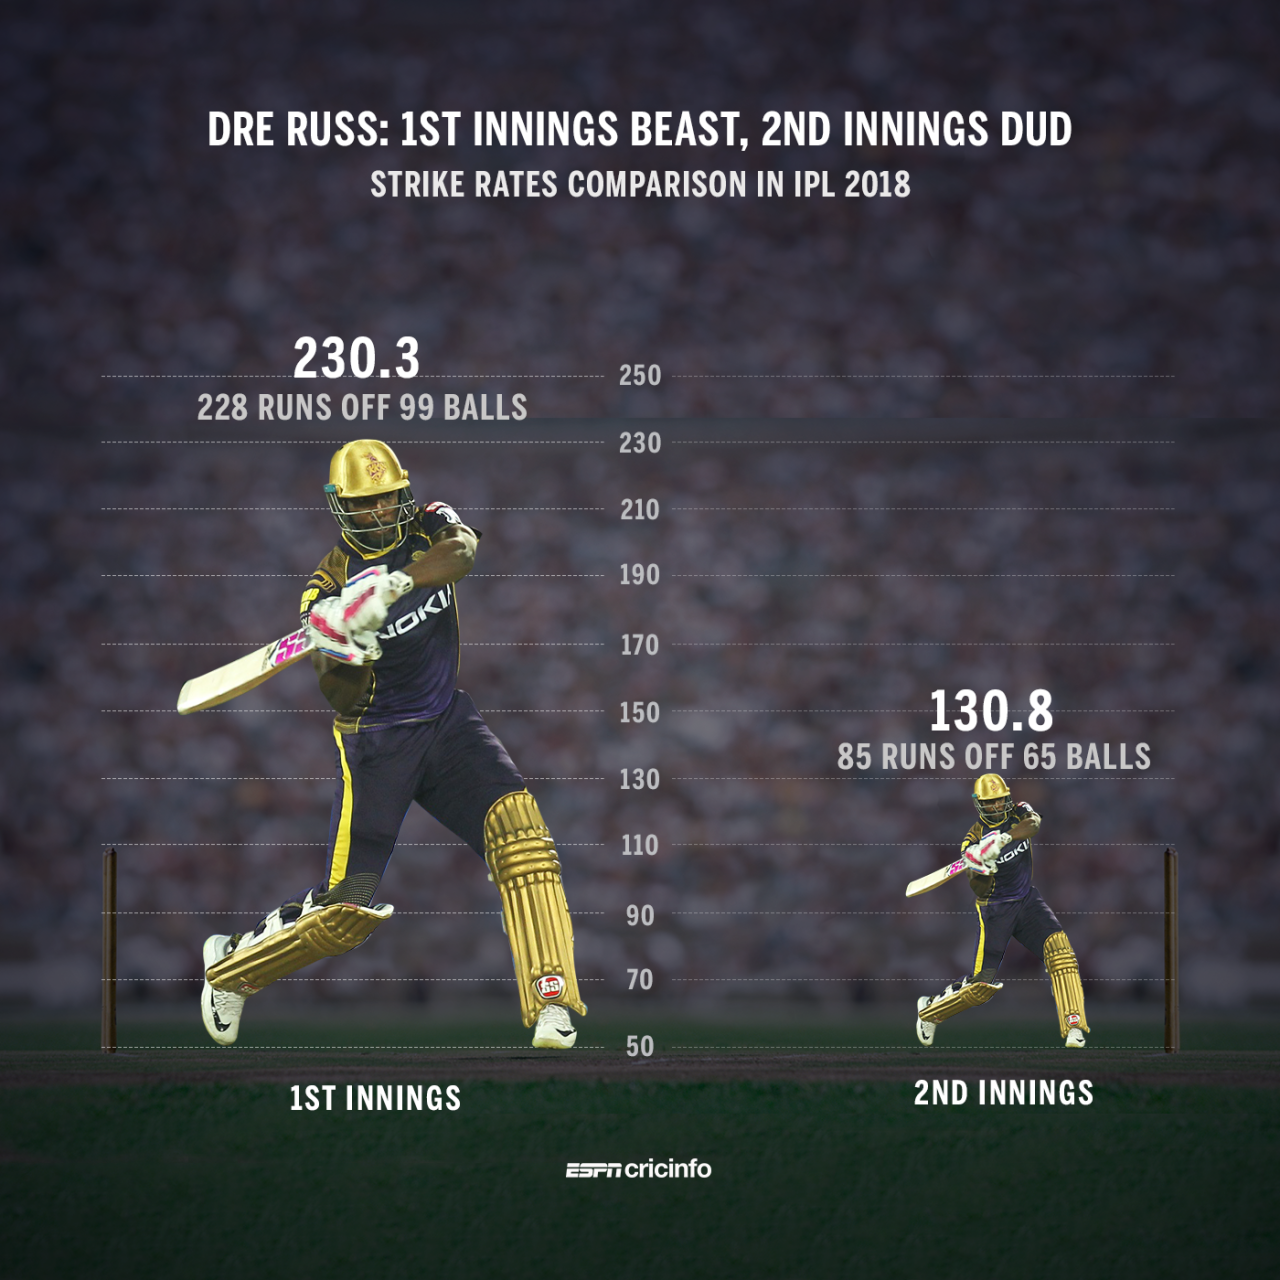 Andre Russell averages 14.5 in six innings while batting second in IPL 2018, May 23, 2018